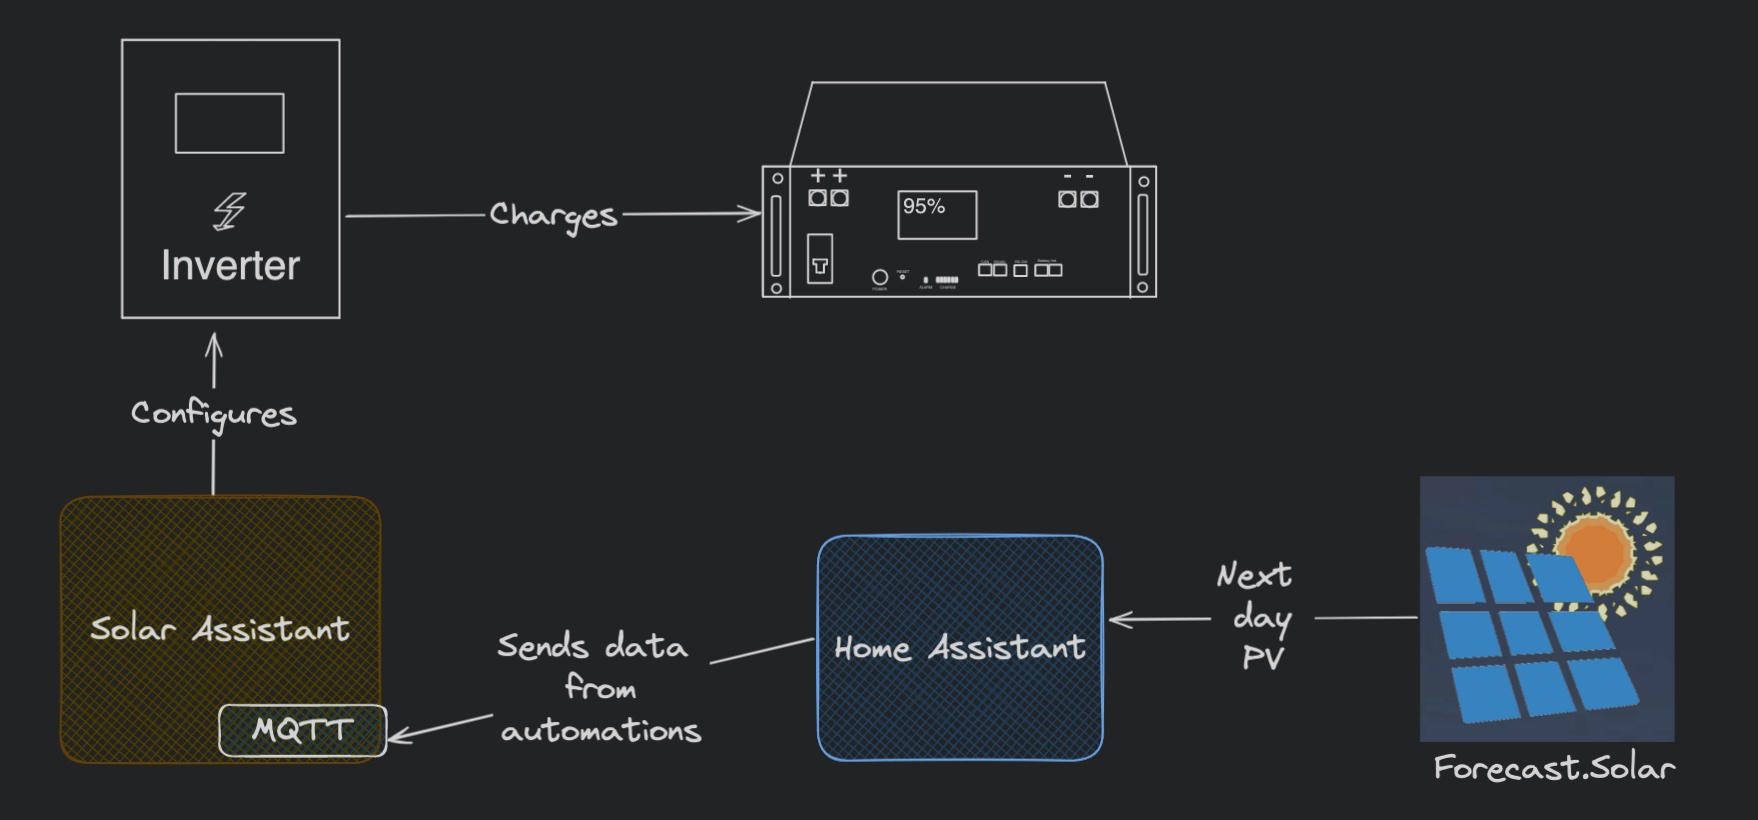 A diagram illustrating a smart solar battery charging automation system. It shows an inverter connected to a battery display indicating 95% charge. Two-way communication is depicted between the inverter and a module labeled 'Solar Assistant' via MQTT protocol. 'Solar Assistant' is further connected to 'Home Assistant,' which is linked to 'Forecast.Solar' represented by a solar panel icon with a sun. The diagram visually explains the process of automating solar battery charging based on solar energy production forecasts.